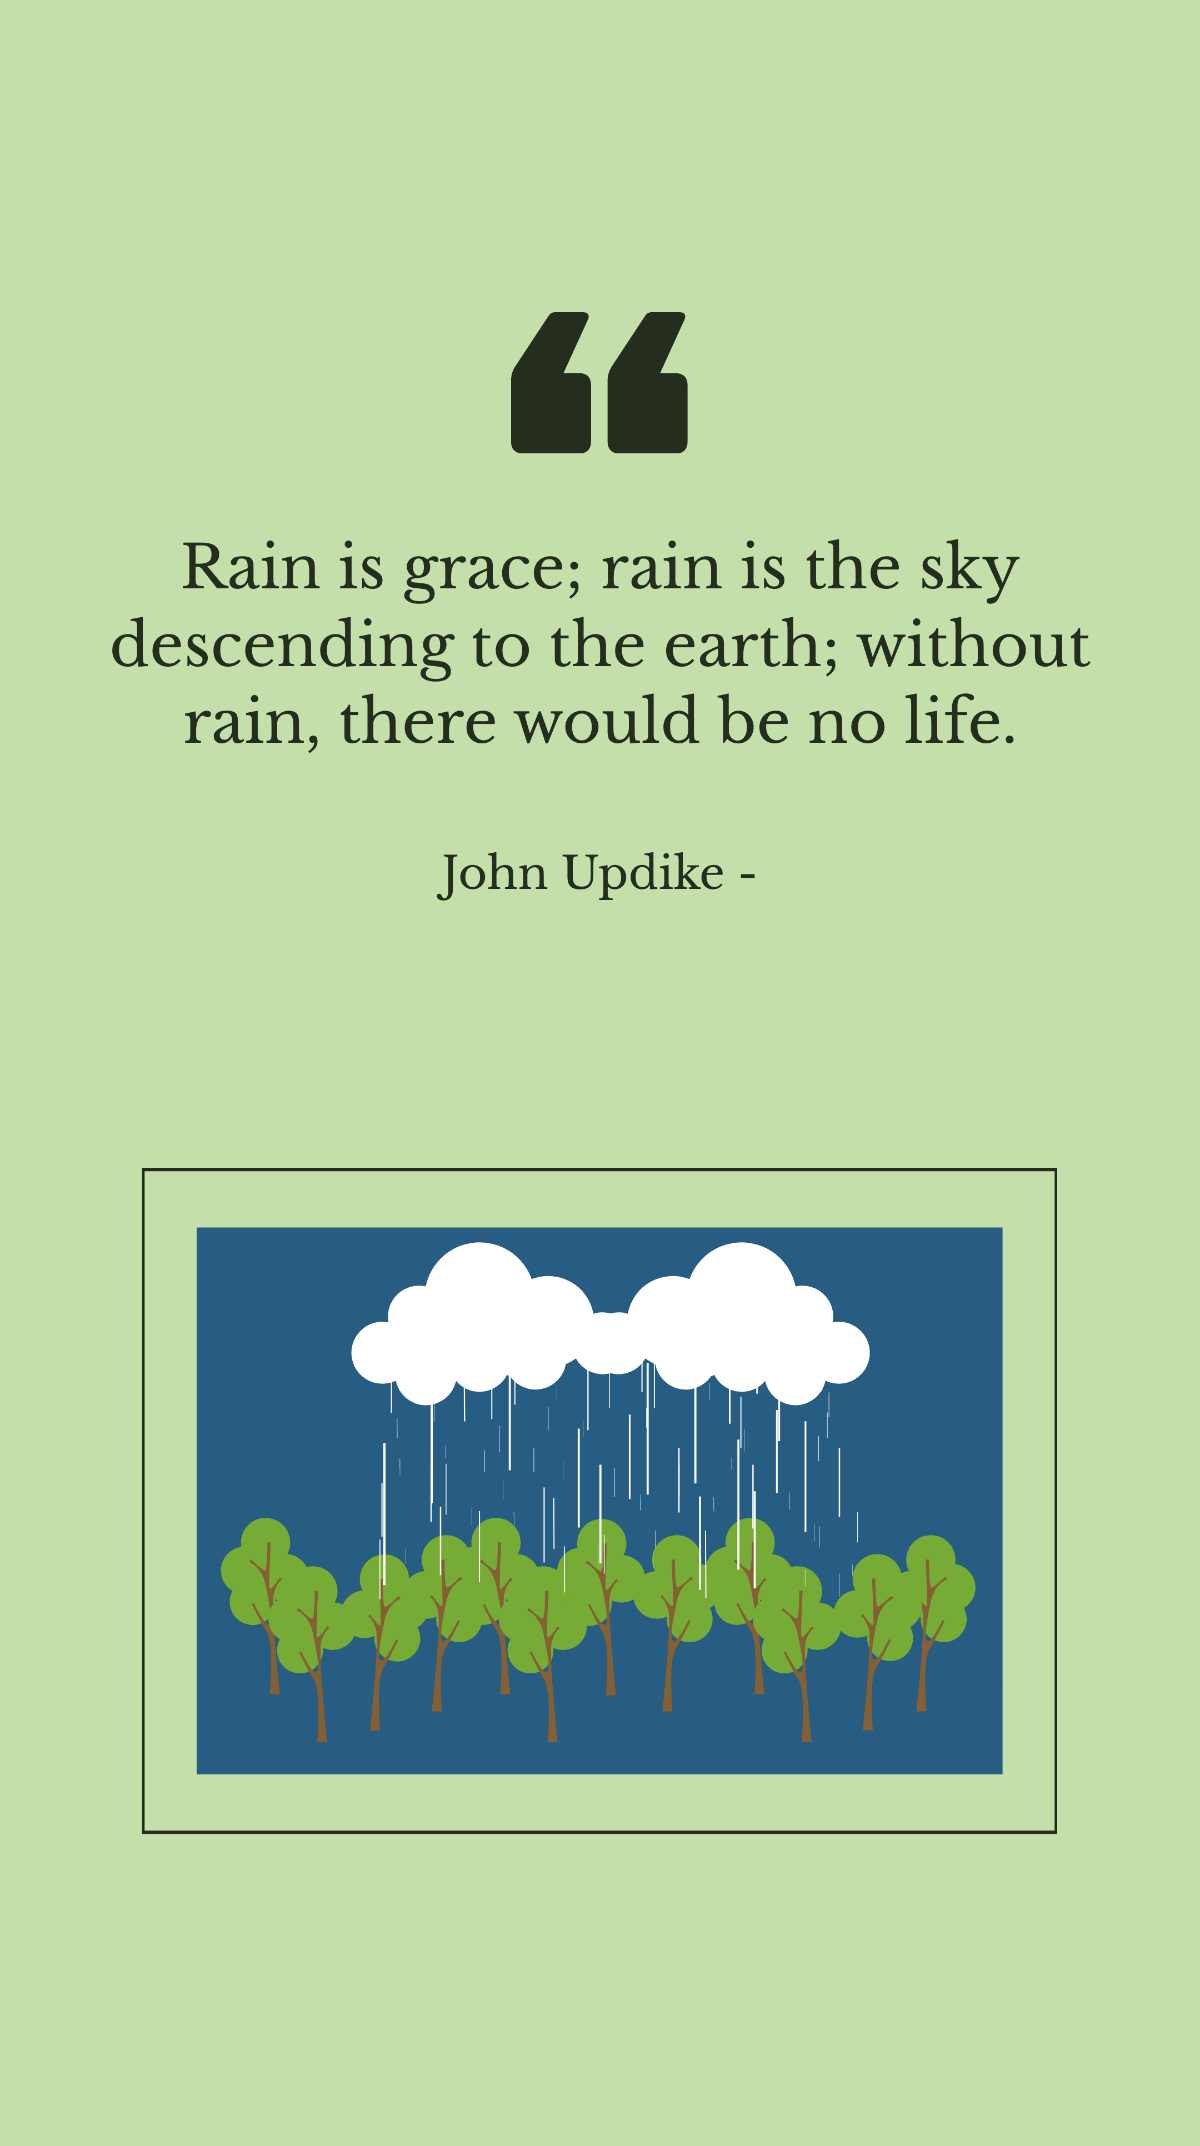 Free John Updike - Rain is grace; rain is the sky descending to the earth; without rain, there would be no life. Template